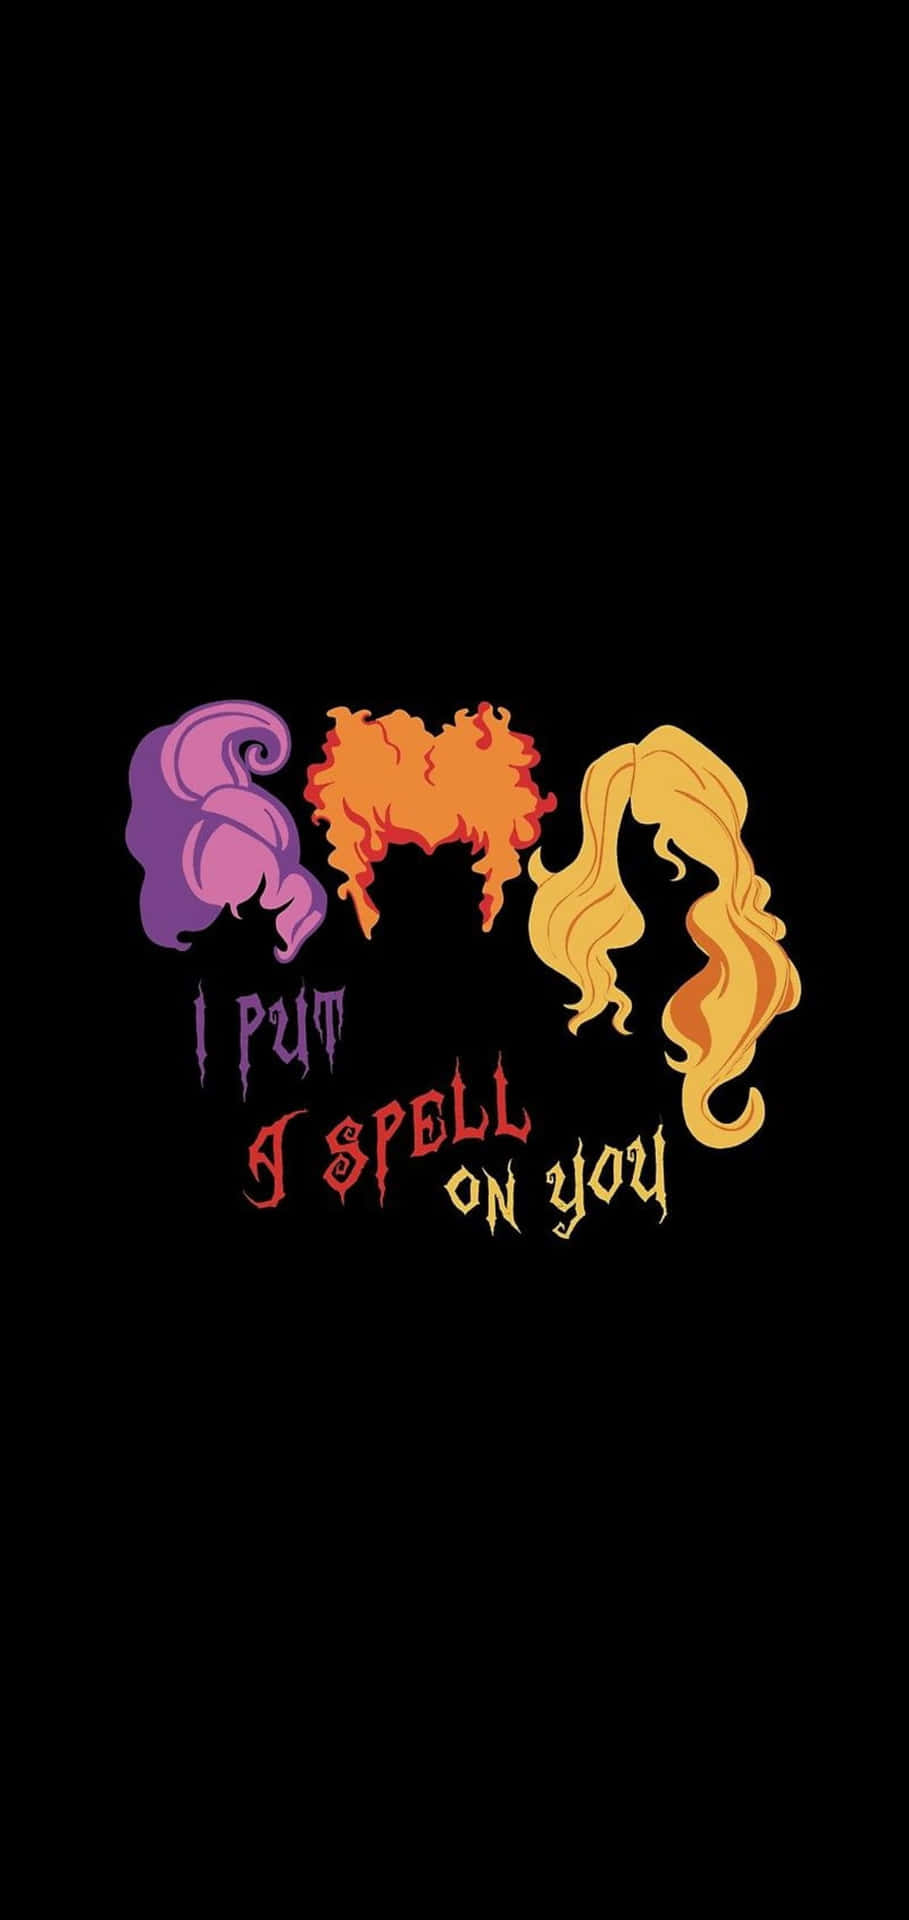 All eyes on the Sanderson Sisters as they bring mischief to Halloween night!